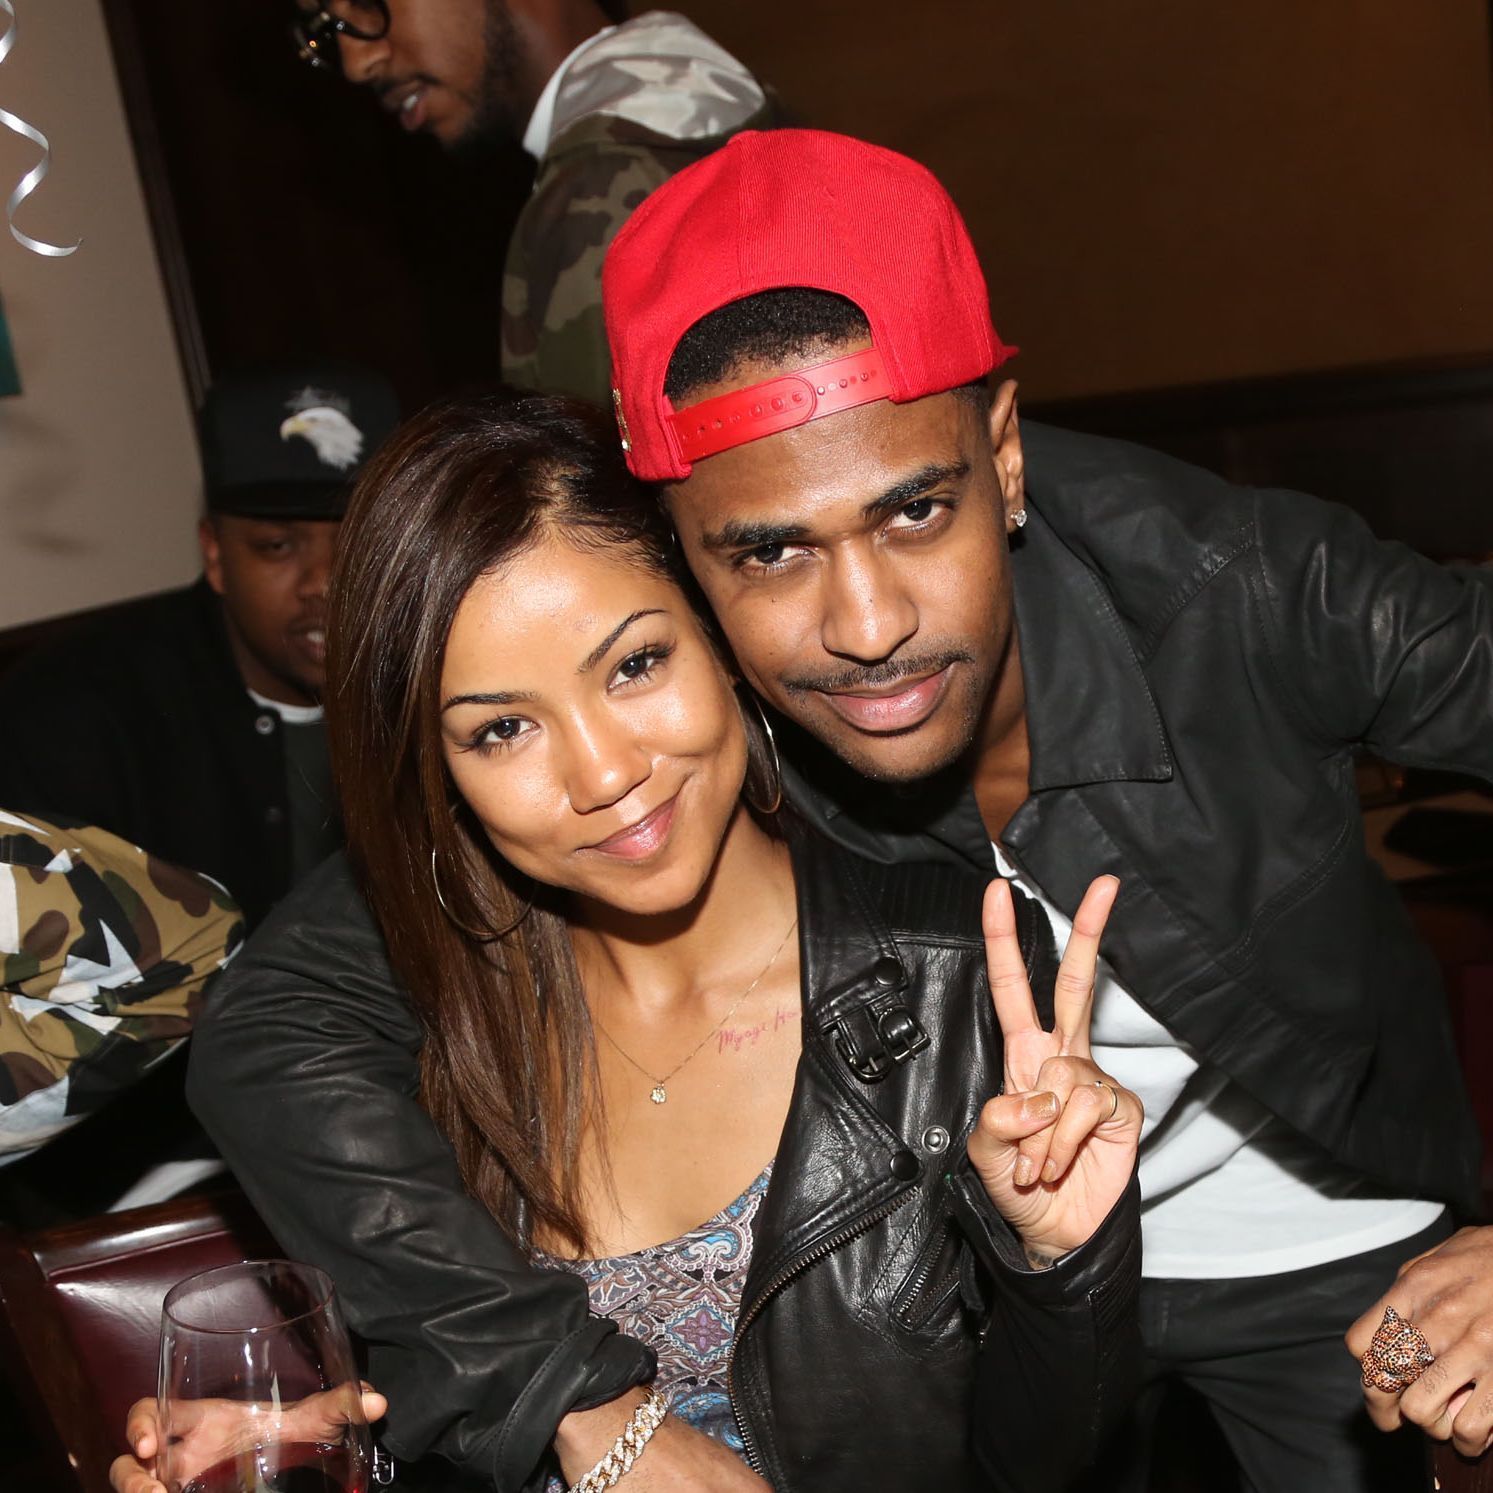 Big Sean And Jhene Aiko Tease A New Collaboration - And It Looks